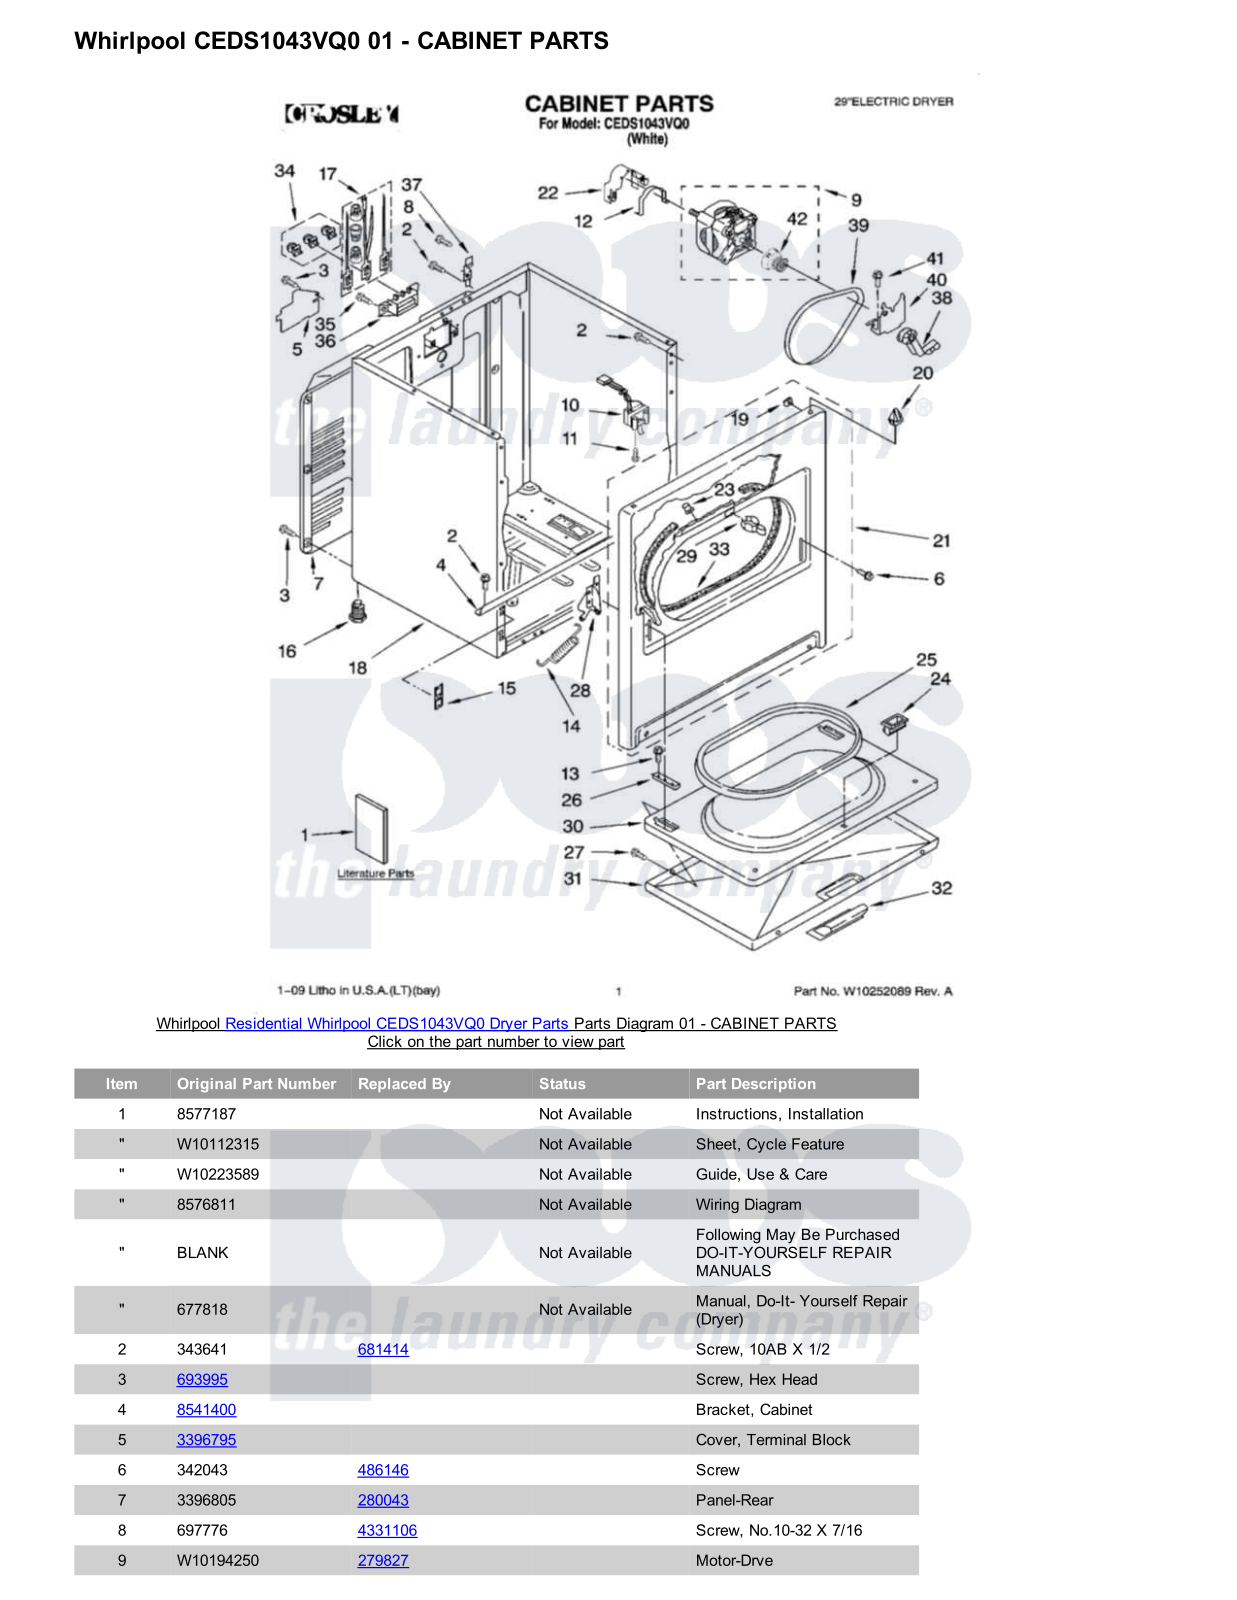 Whirlpool CEDS1043VQ0 Parts Diagram